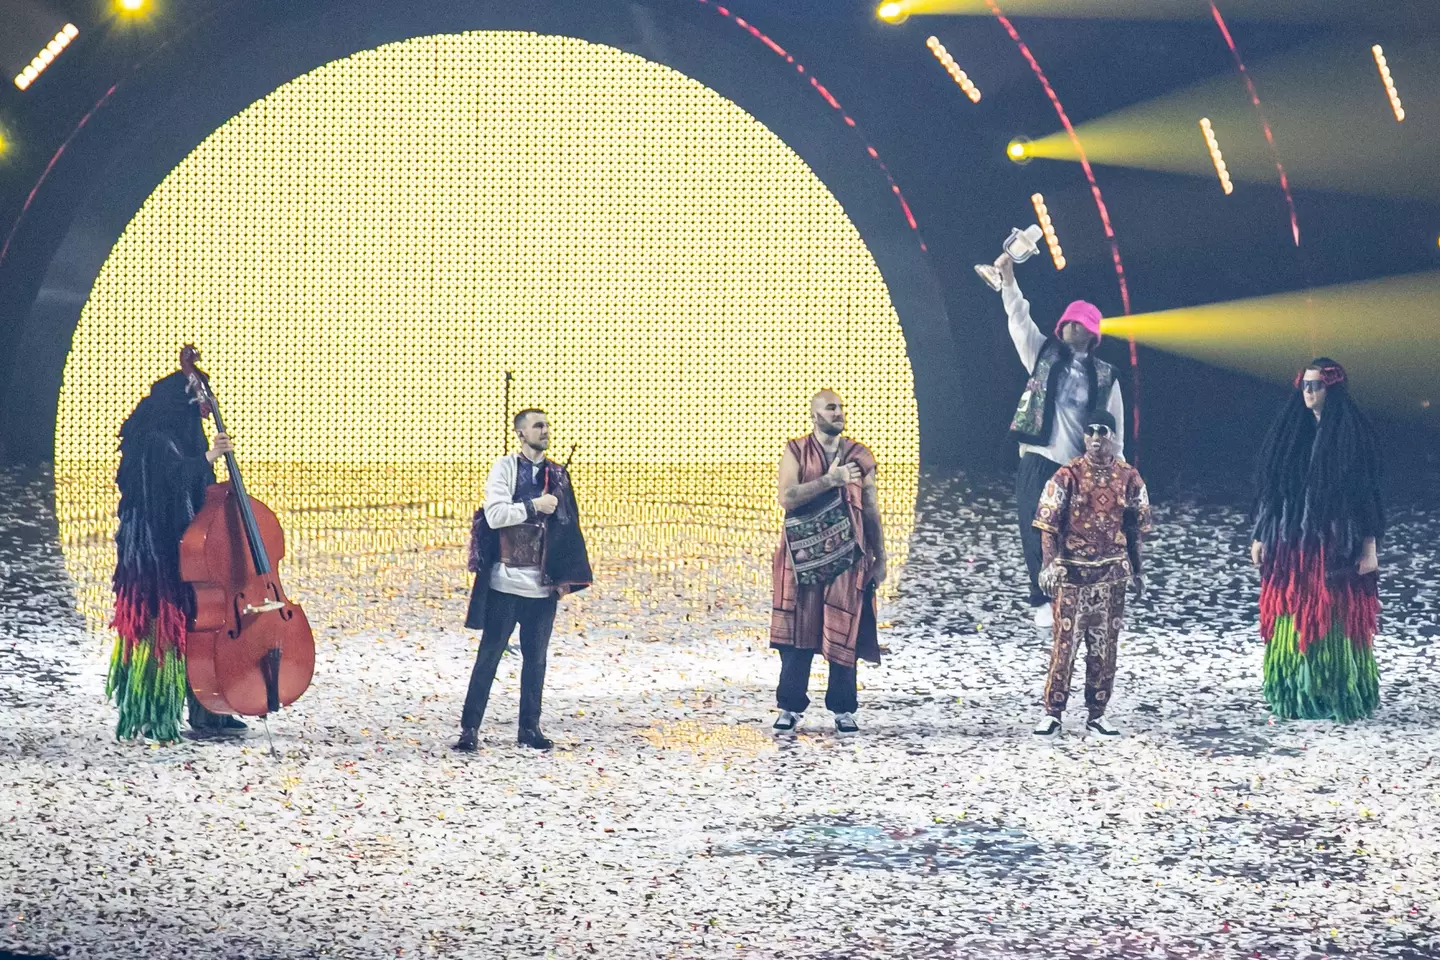 Kalush Orchestra won this year's Eurovision with a whopping 631 points and the winner traditionally hosts the next one.